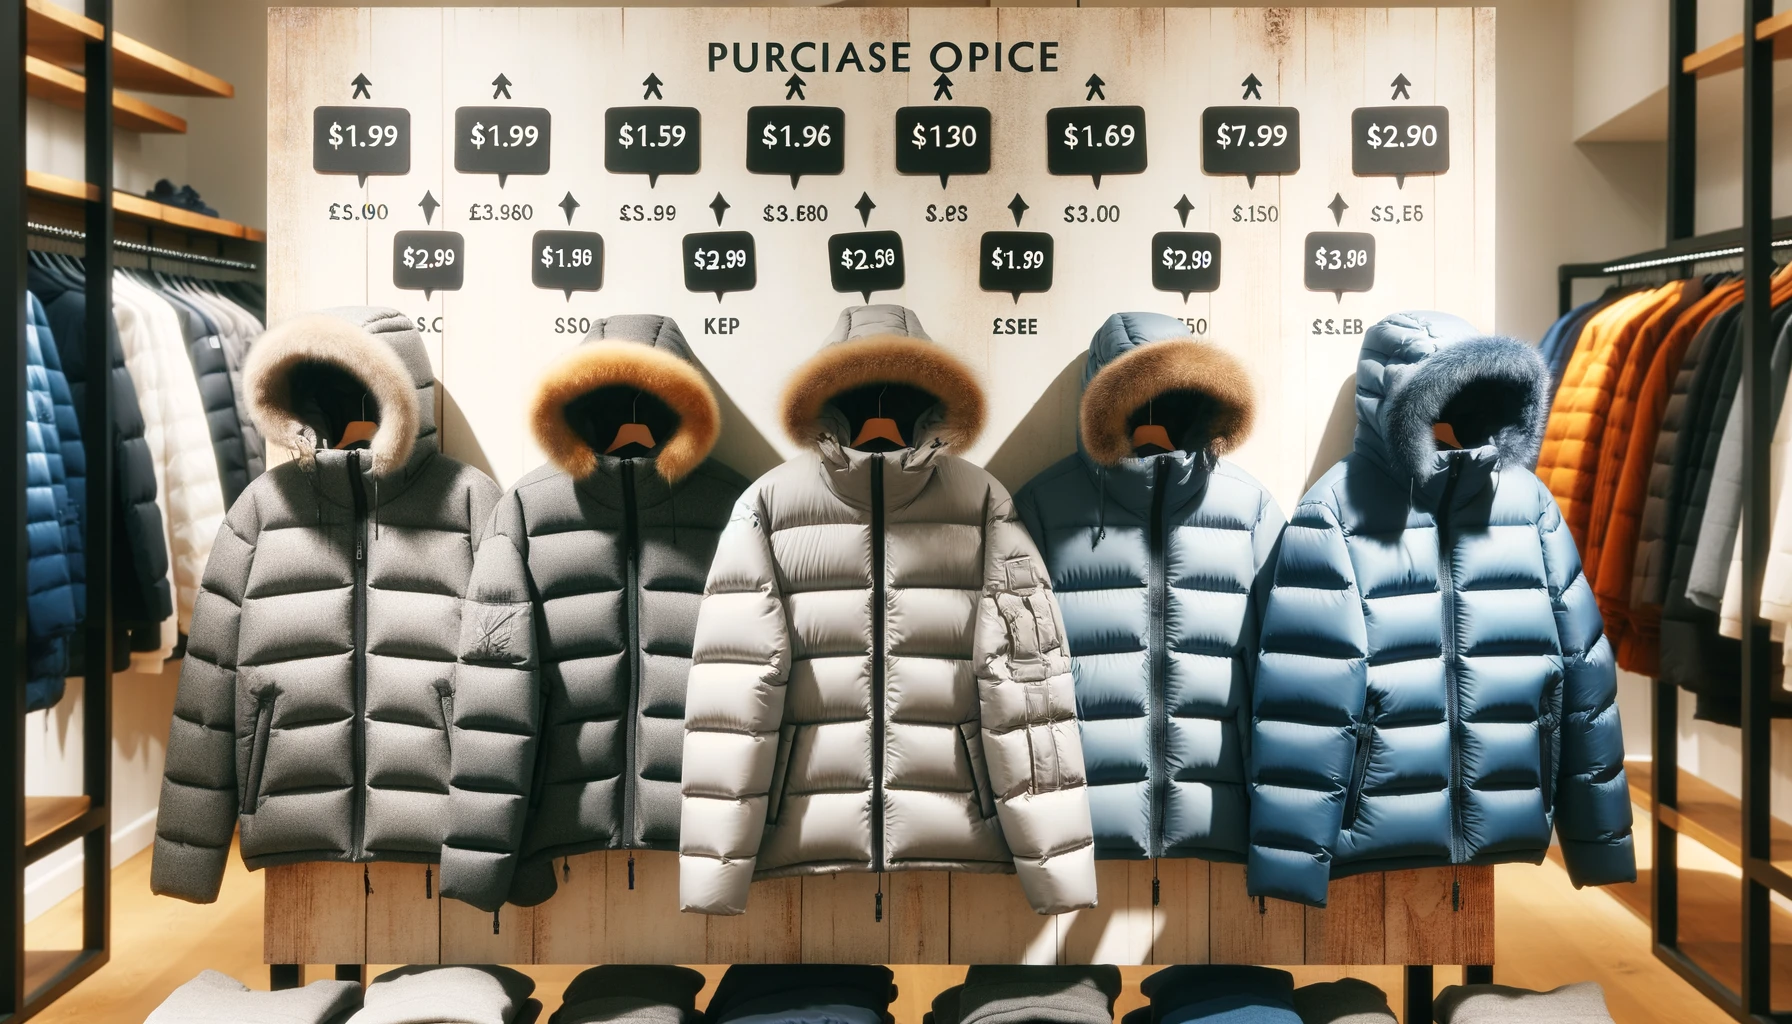 A display of purchase options for hooded down jackets, including price tags and store names, to illustrate where and at what price they can be bought.